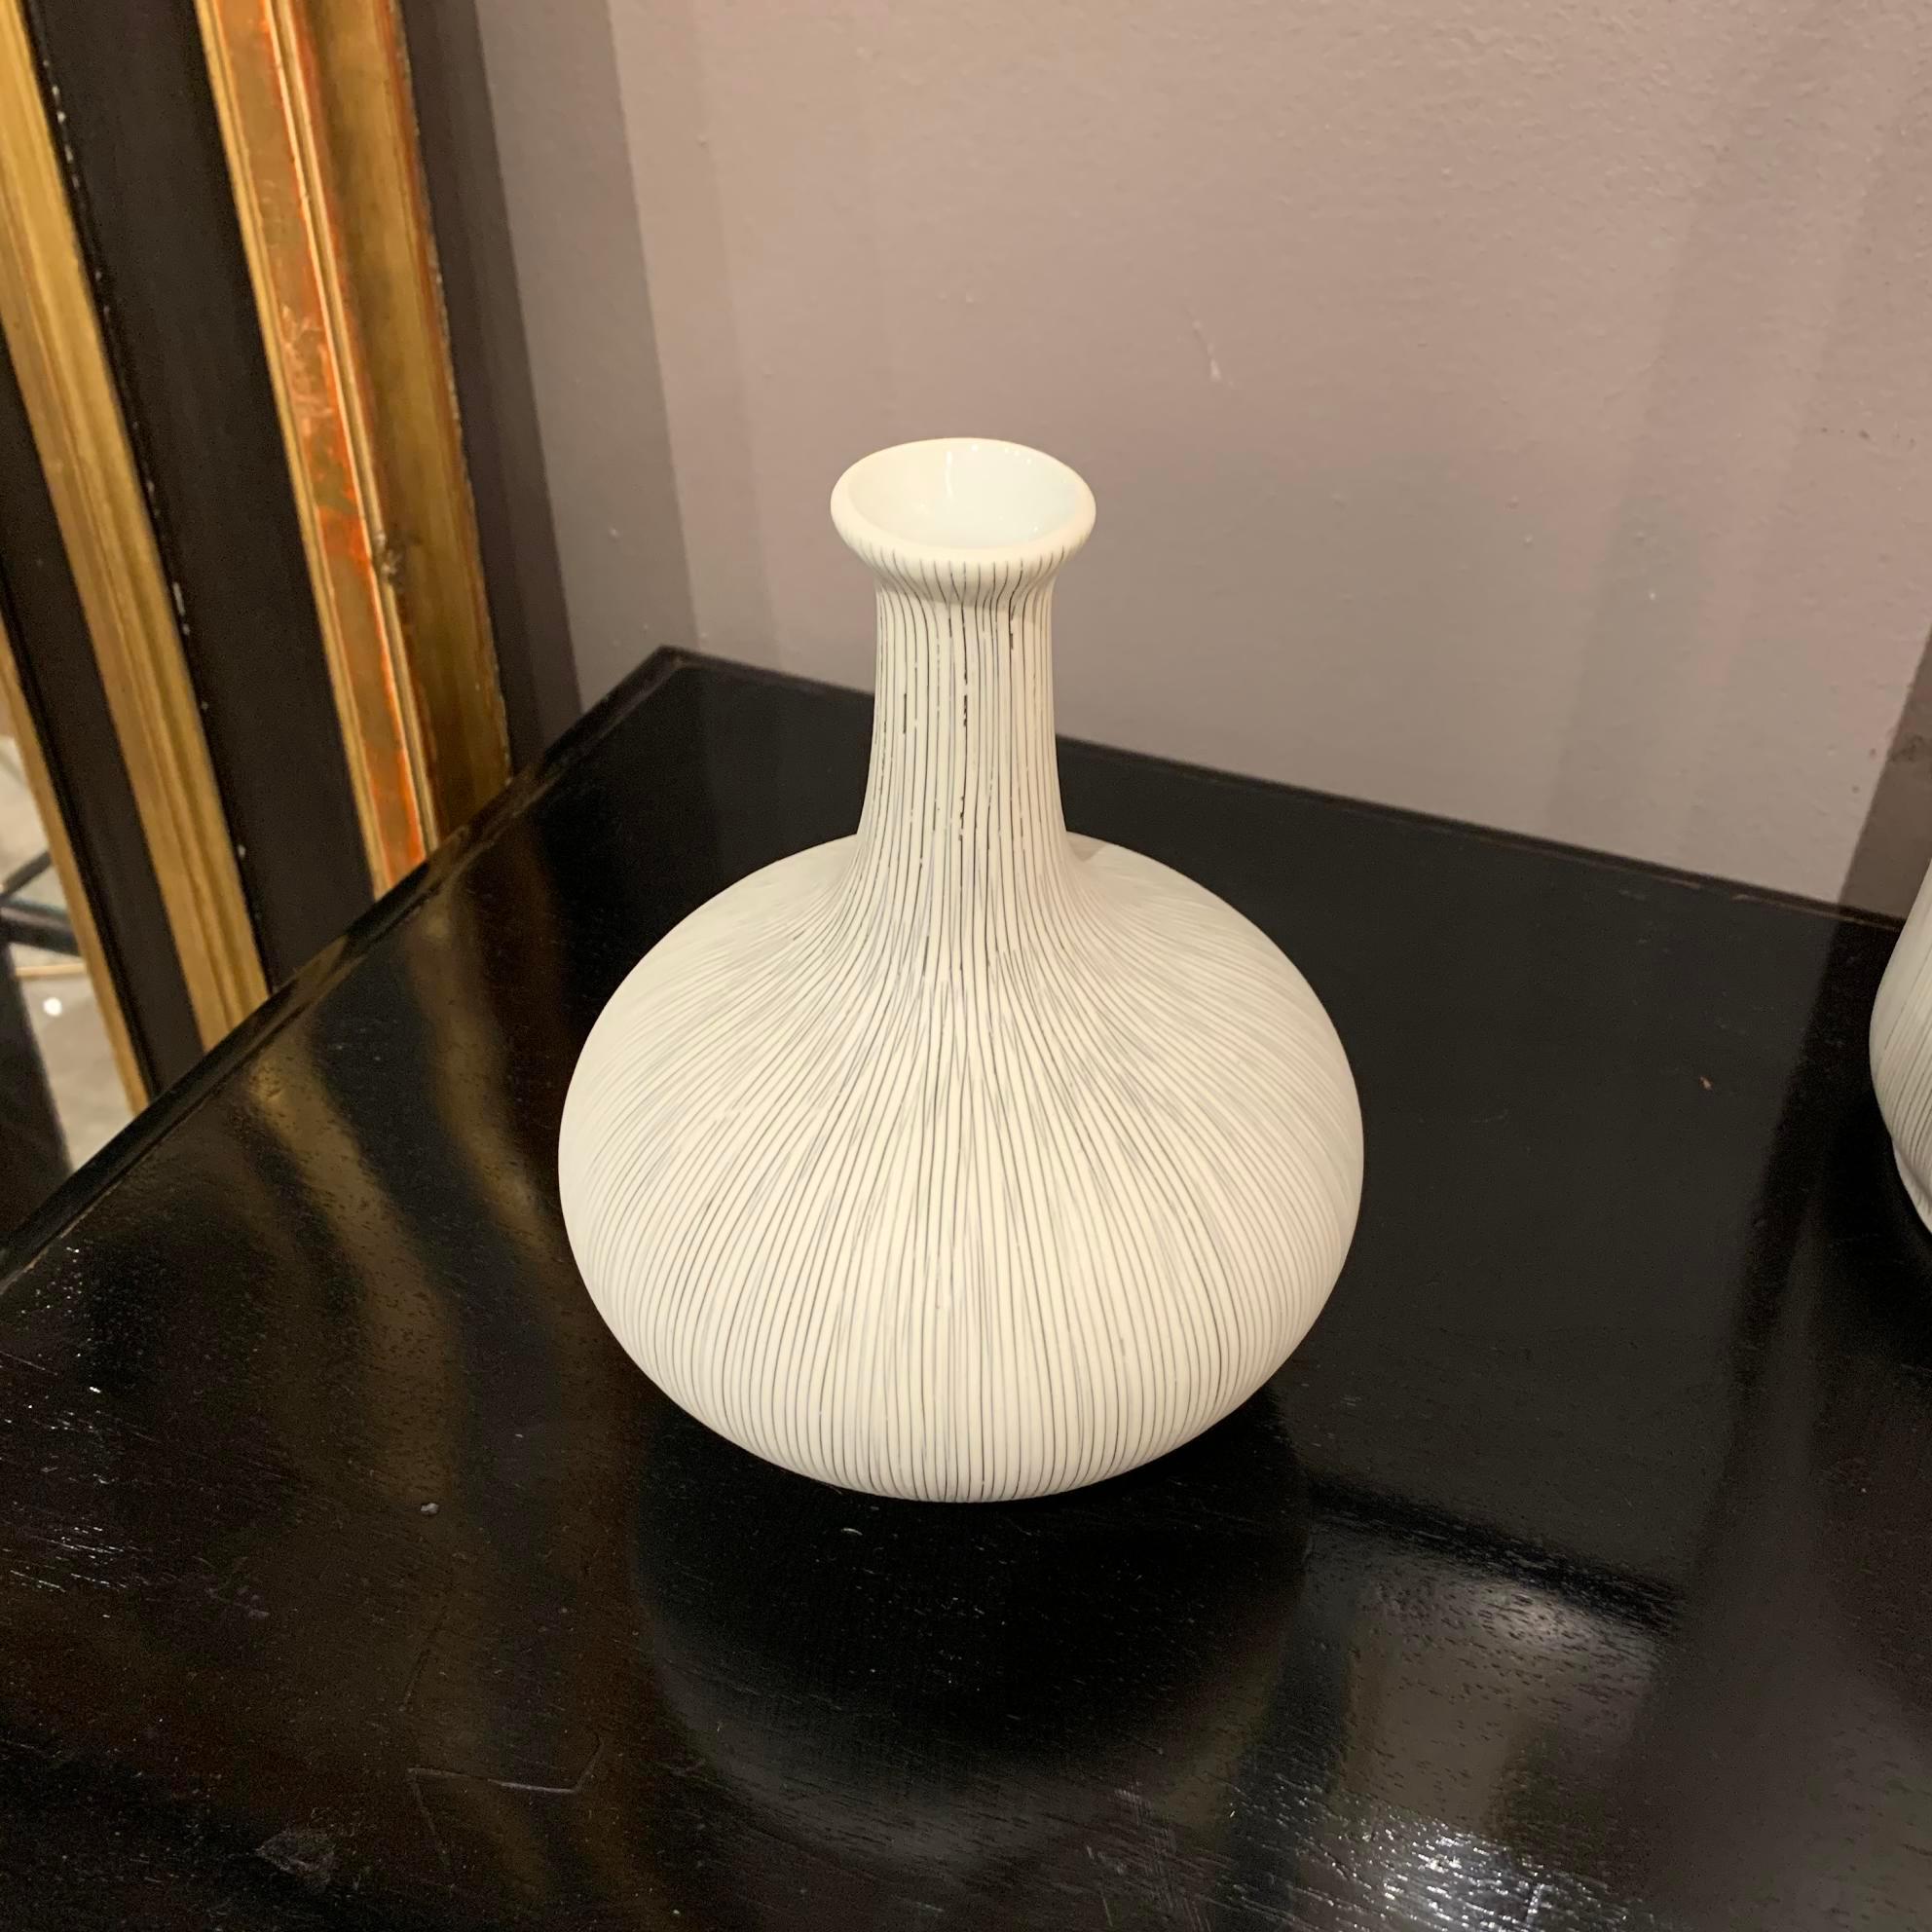 Contemporary Danish design white porcelain vase with fine black stripes.
Long narrow neck with small opening.
Part of a collection of Danish design vases.